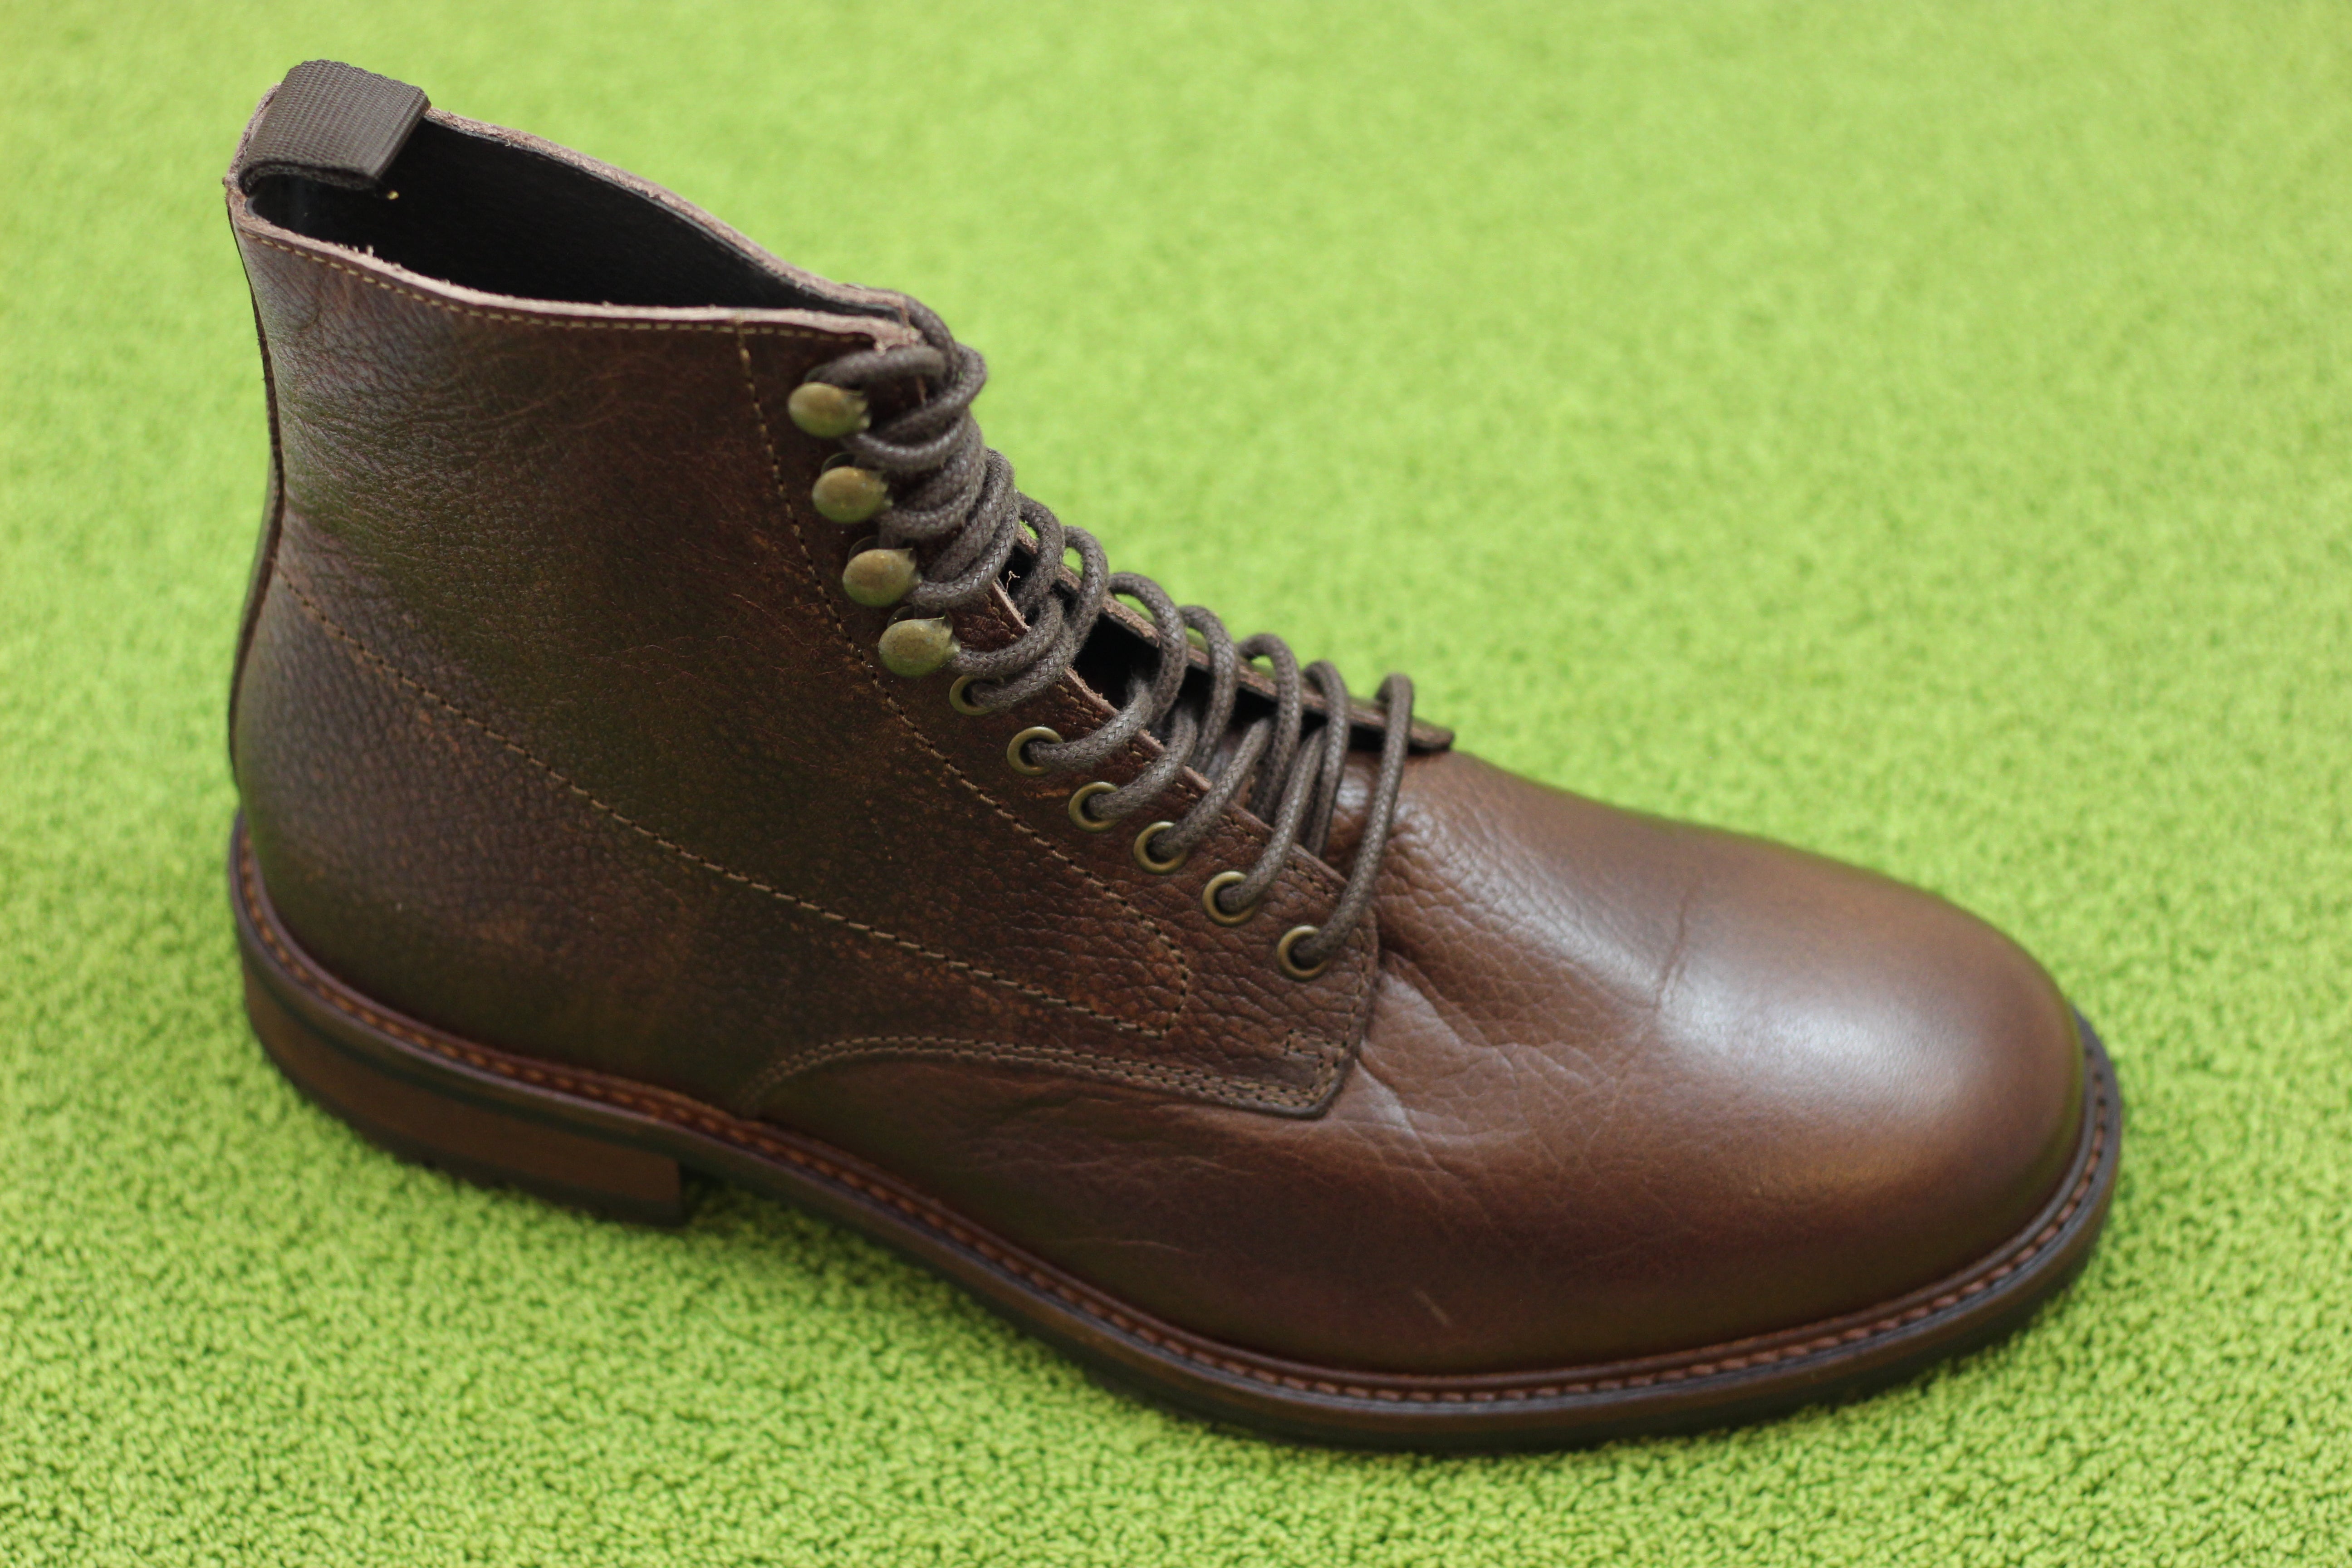 York Leather Lace Boot - Brown 11